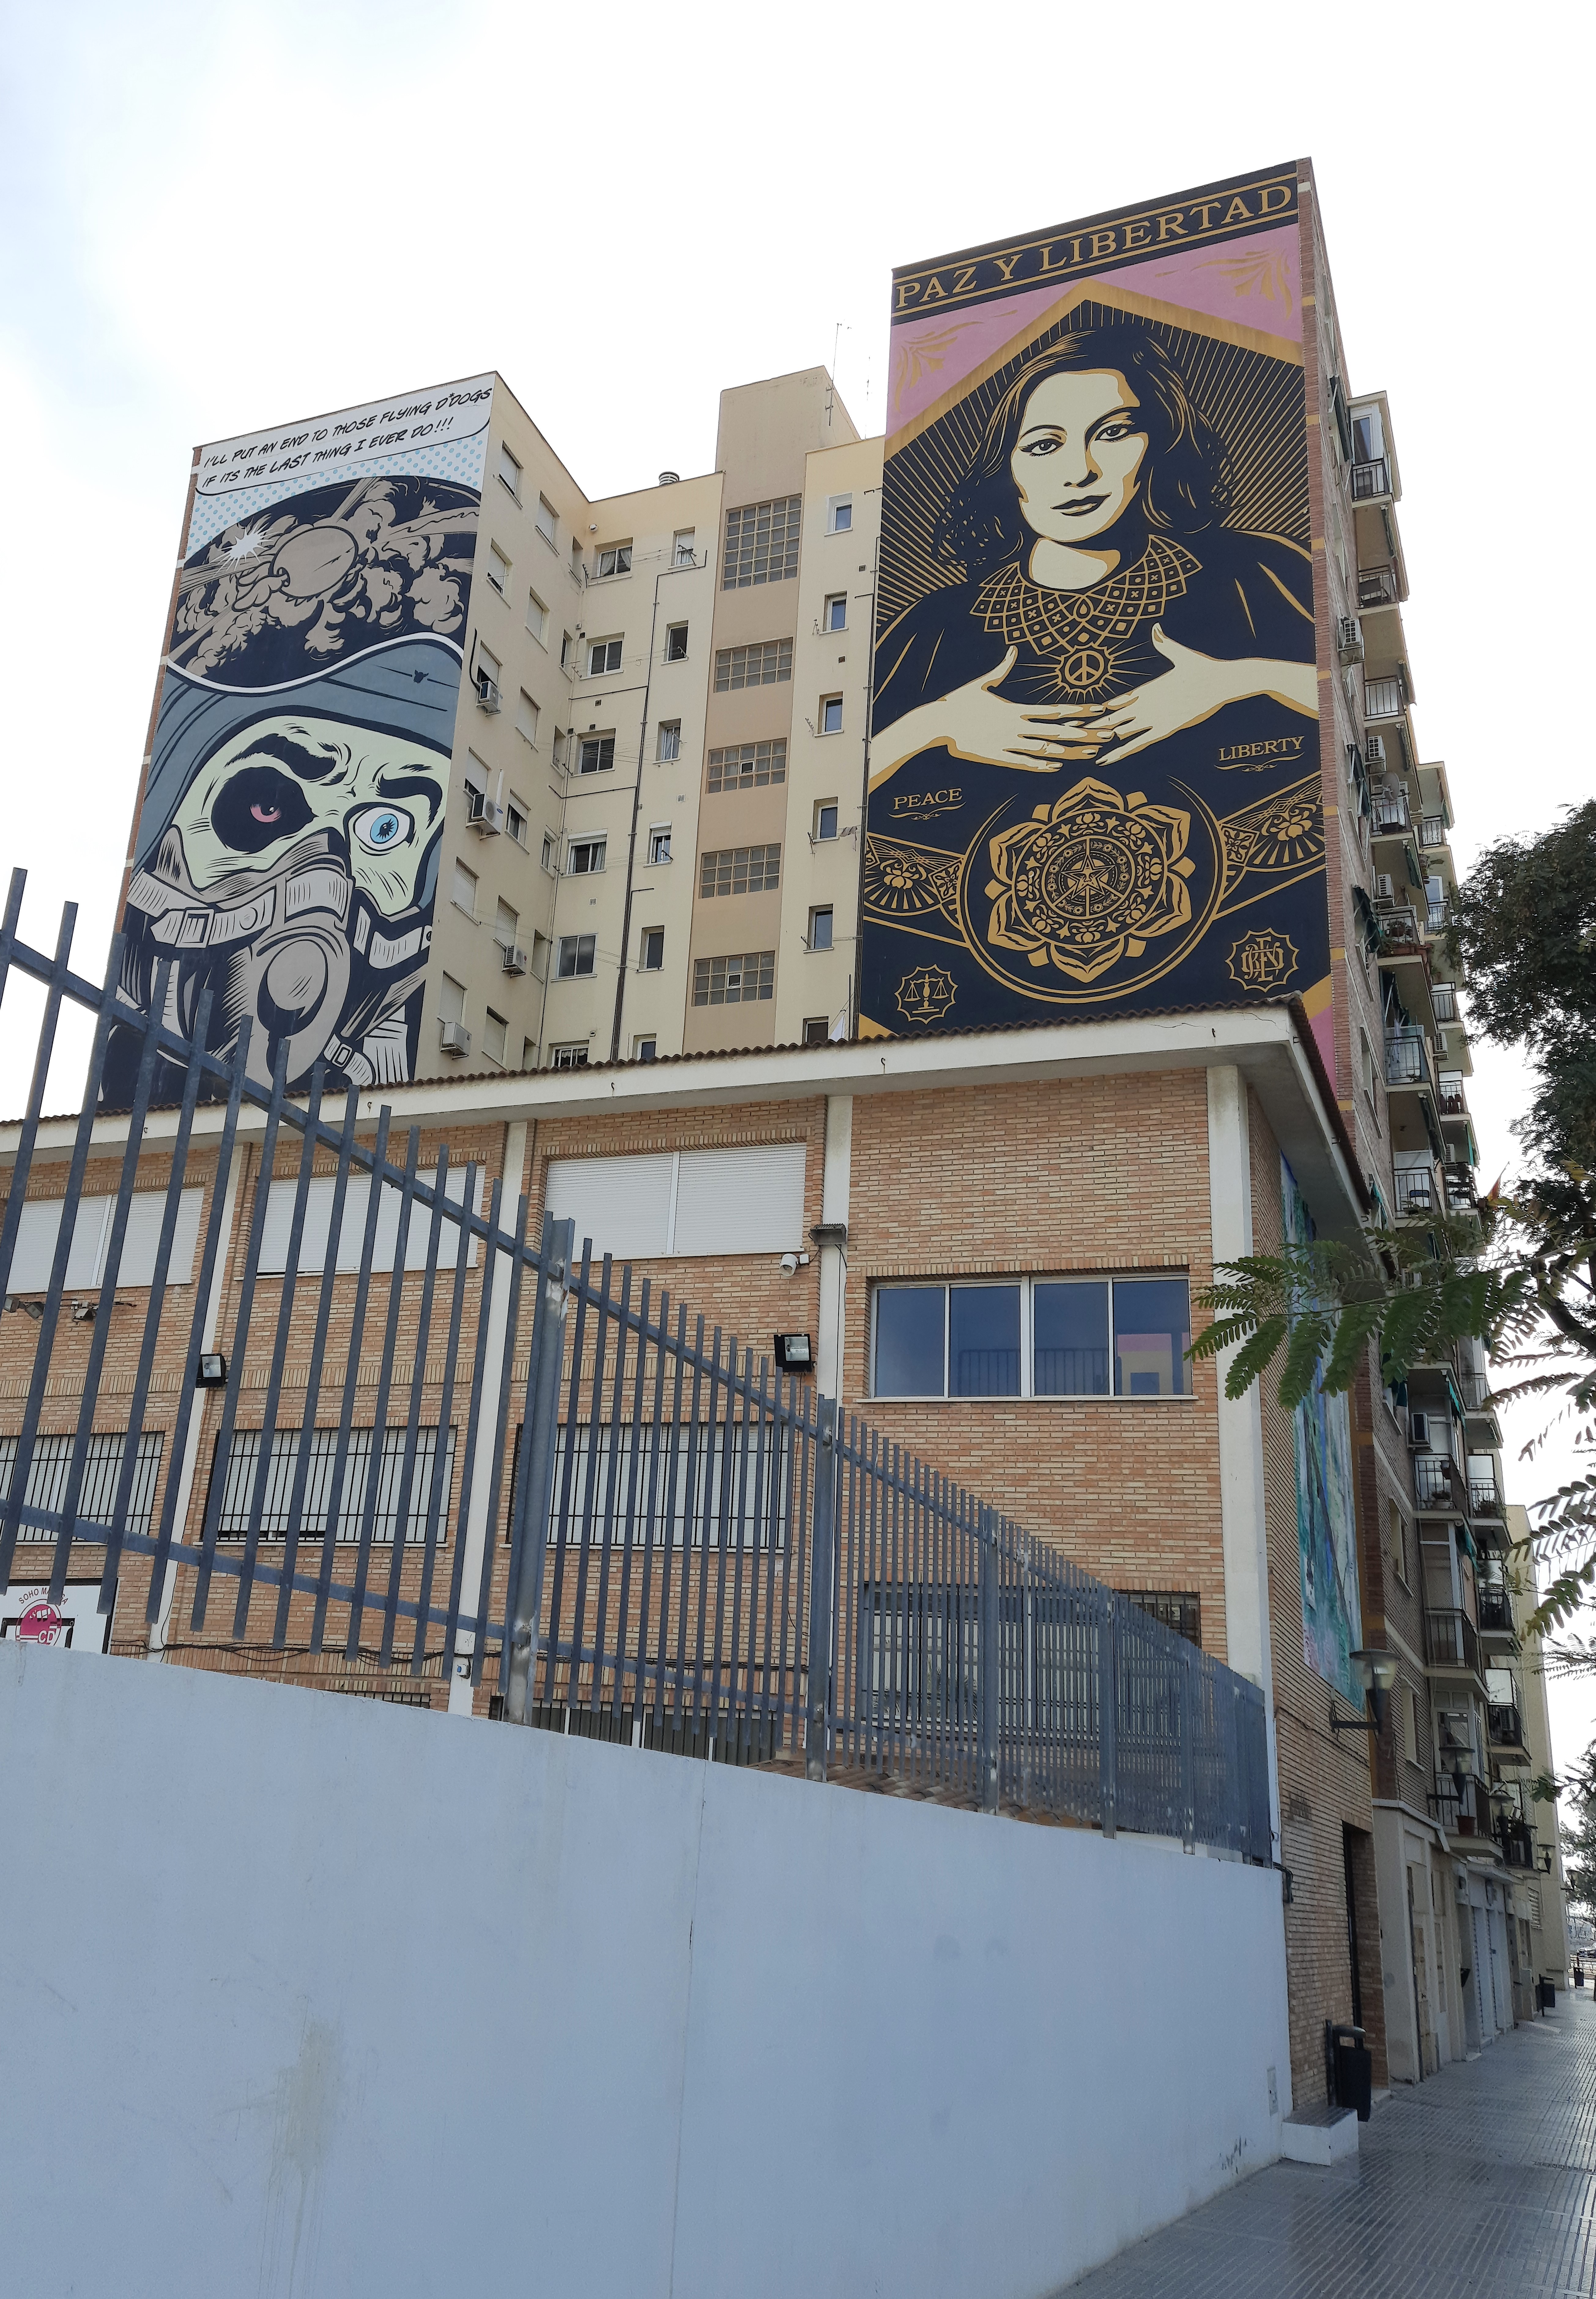 Graffiti 6950 OBEY by the artist DFace captured by Mephisroth in Málaga Spain